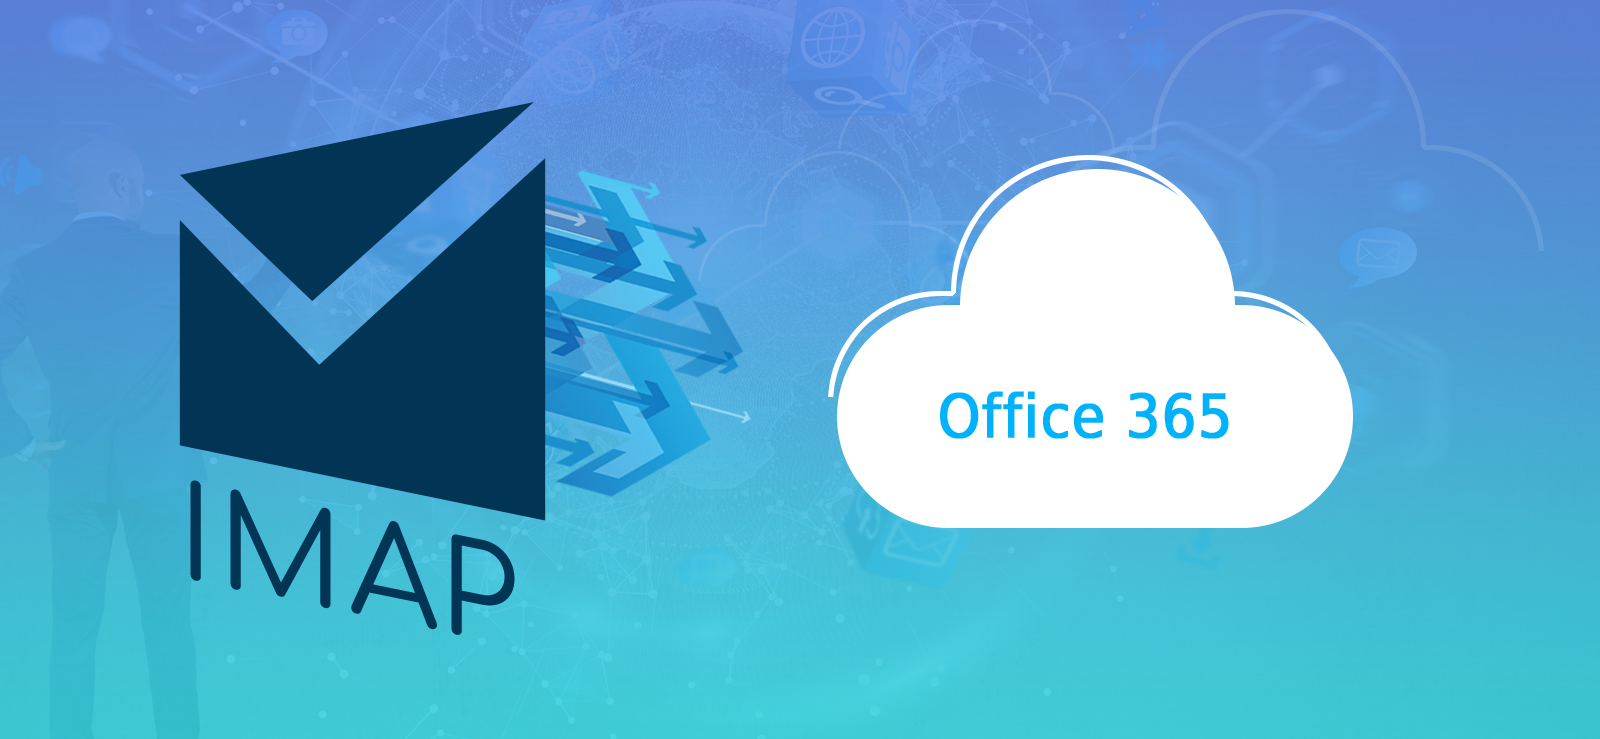 How to Migrate IMAP Emails to Office 365?